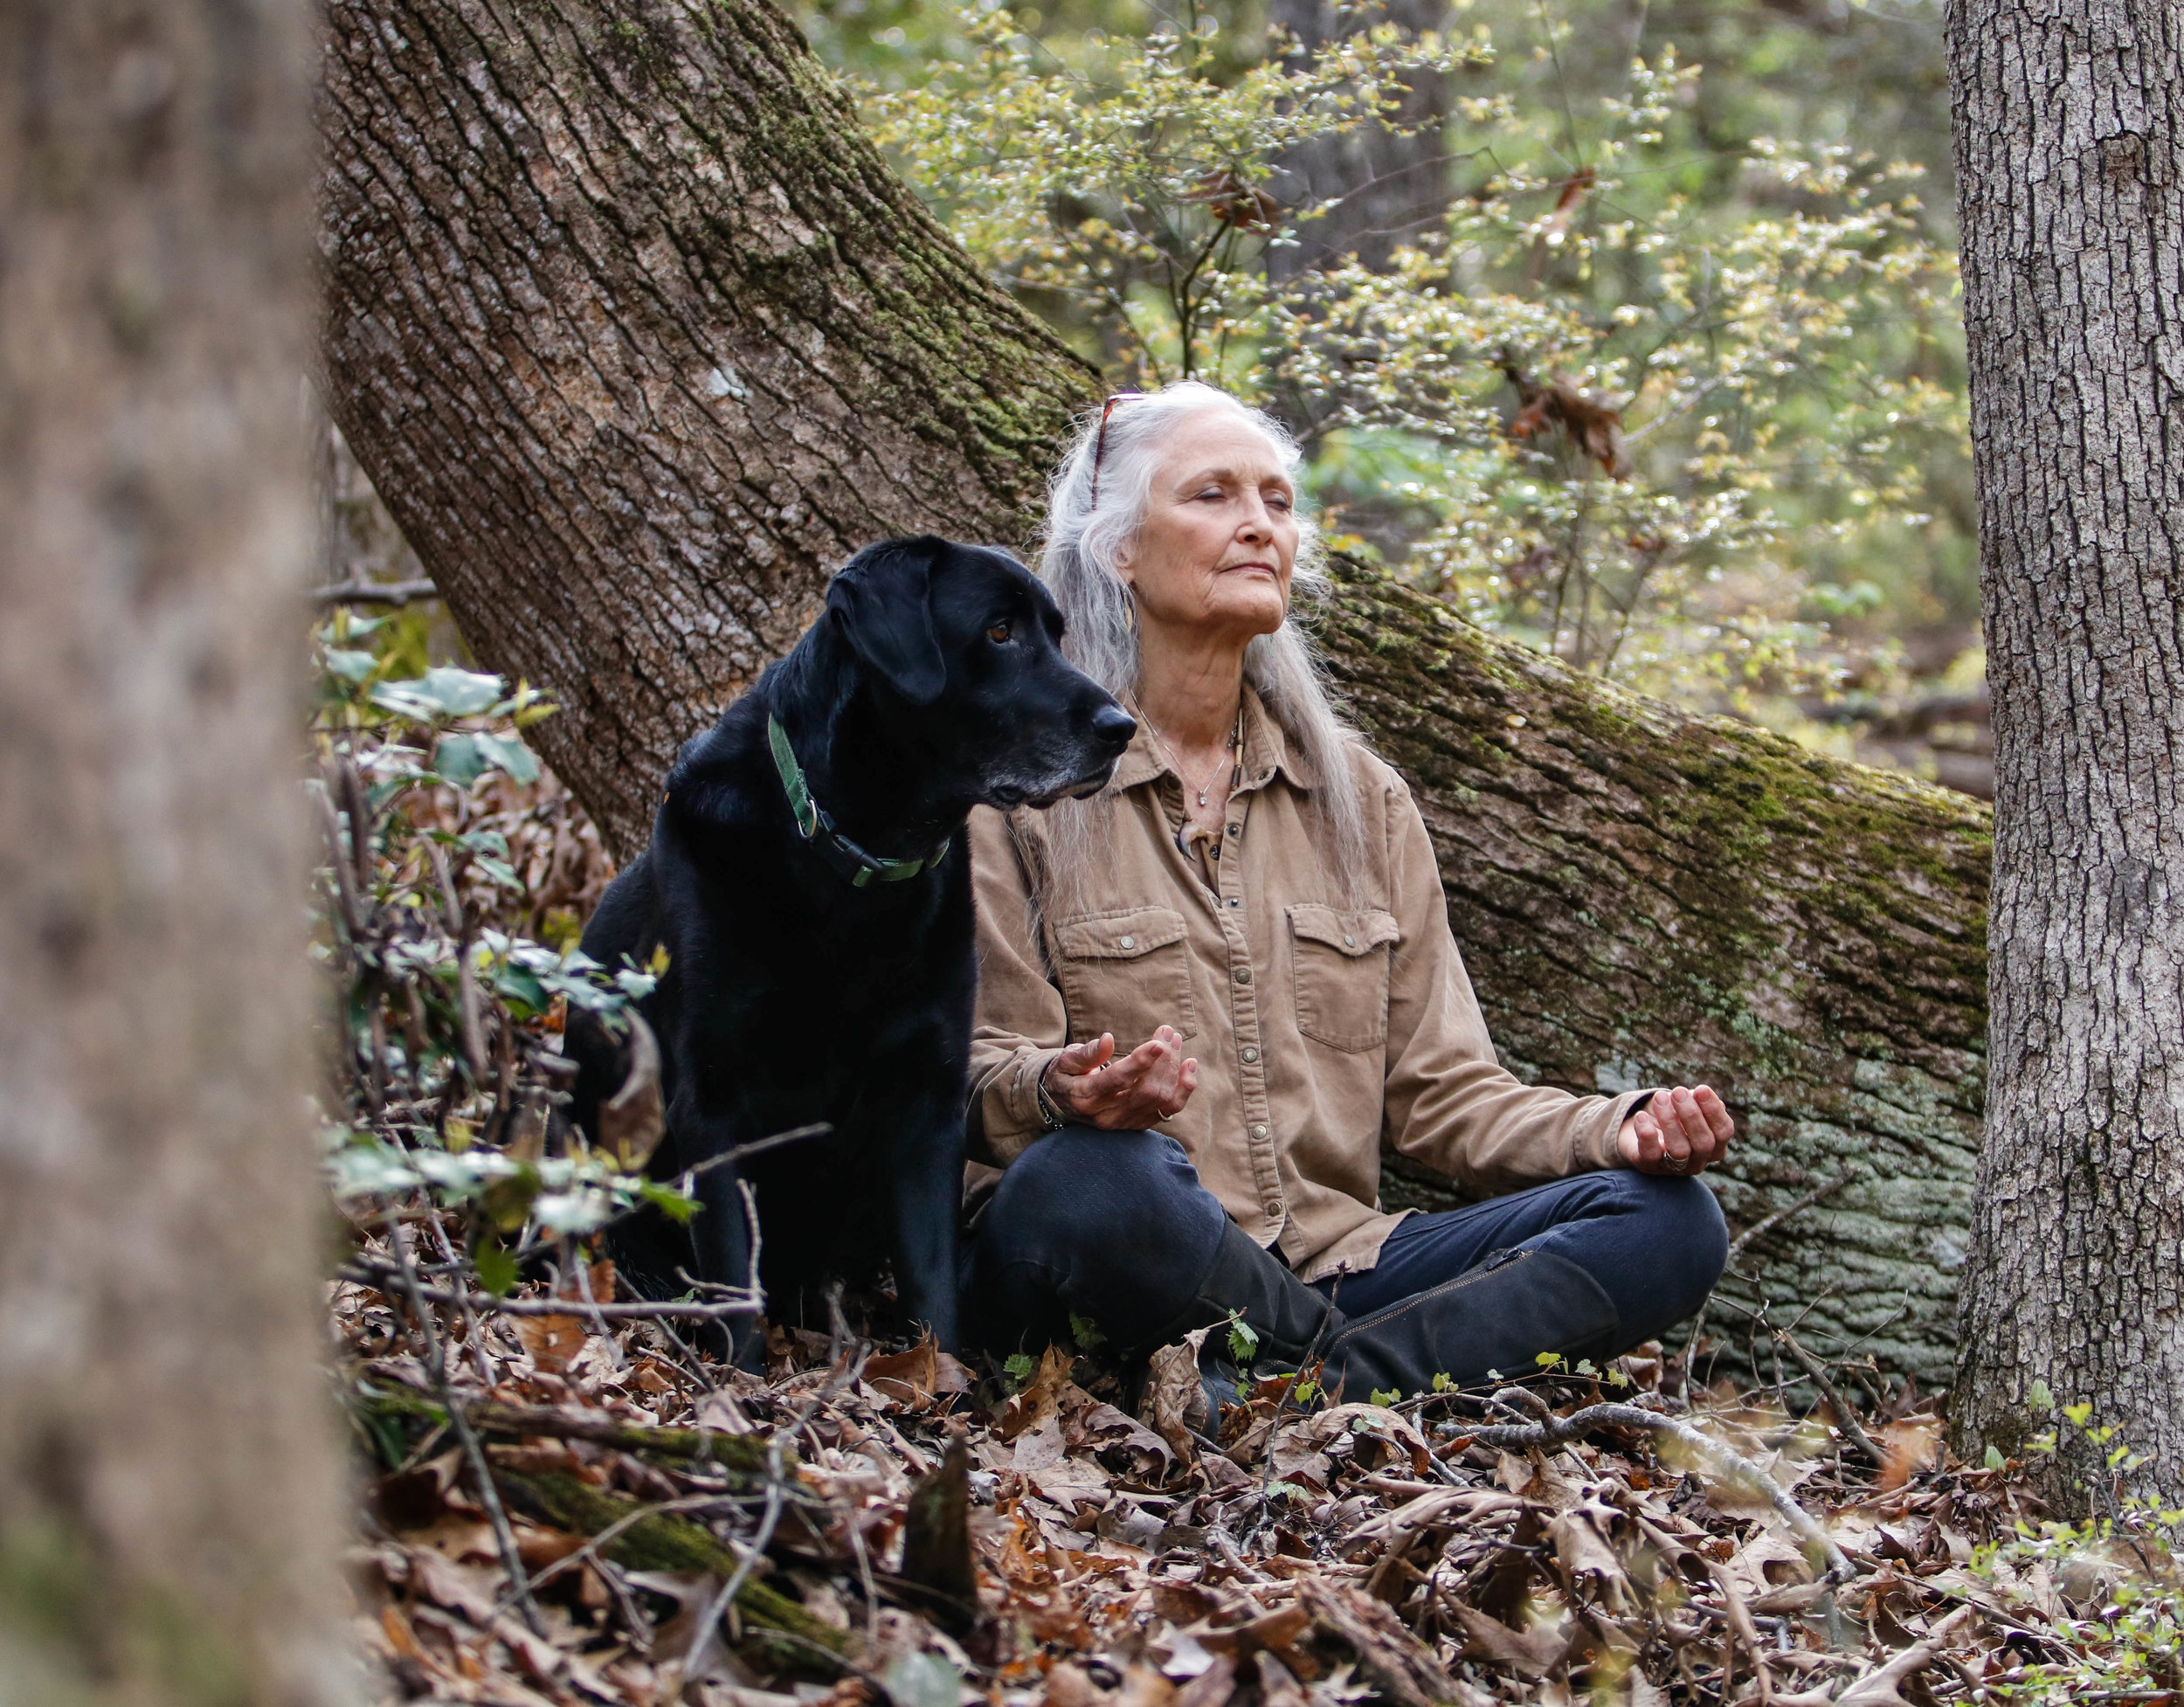  Tinsley mediates with her dog Beaux in one of the many secluded wooded areas of Earthsong on Saturday, April 7, 2018.  